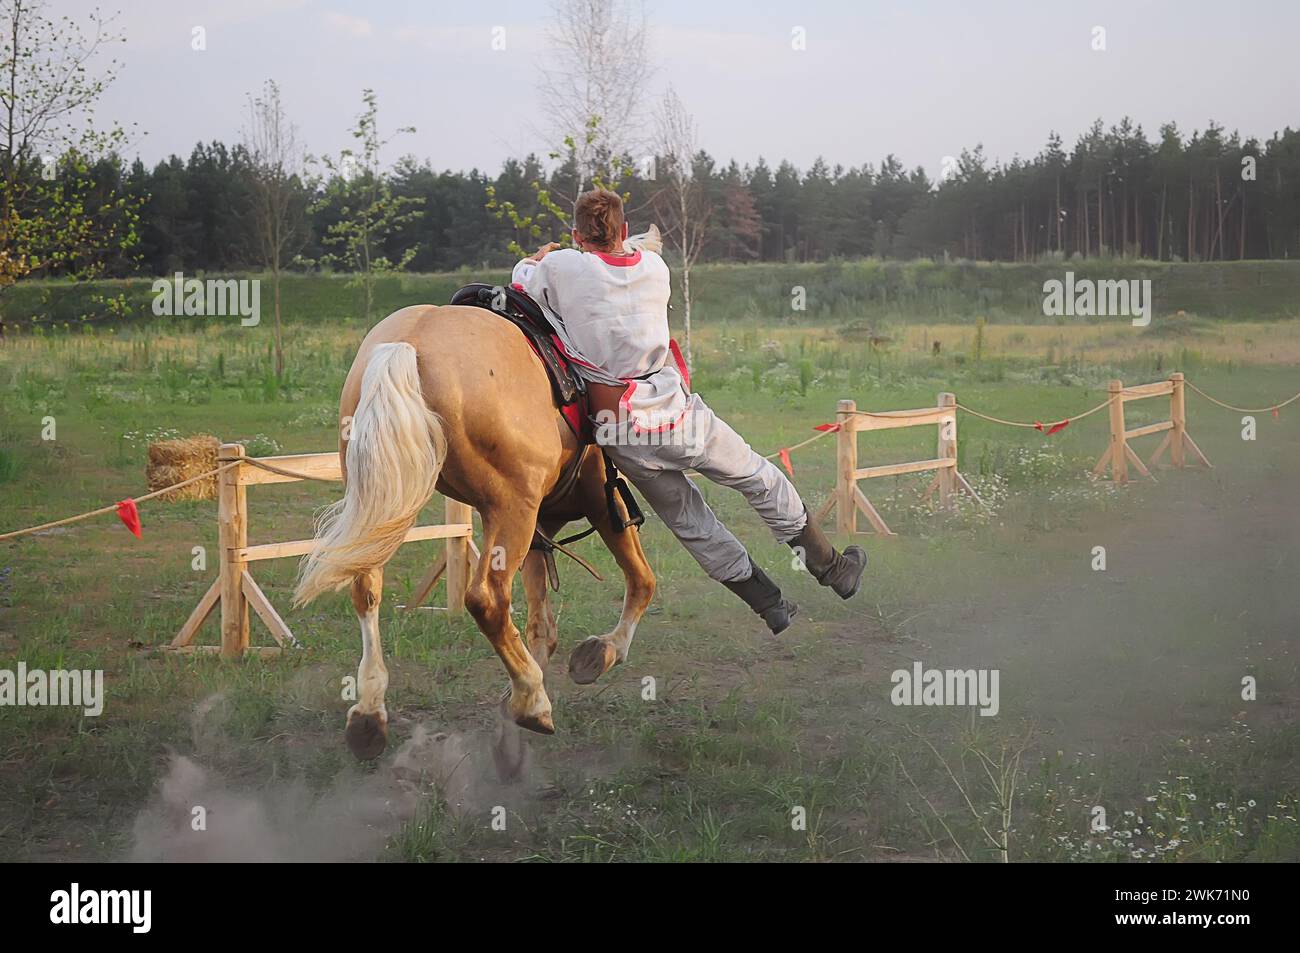 Kyiv, Ukraine. July 06, 2013. the rider performs in a traditional equestrian show on the occasion of the summer solstice in eastern europe. Stock Photo